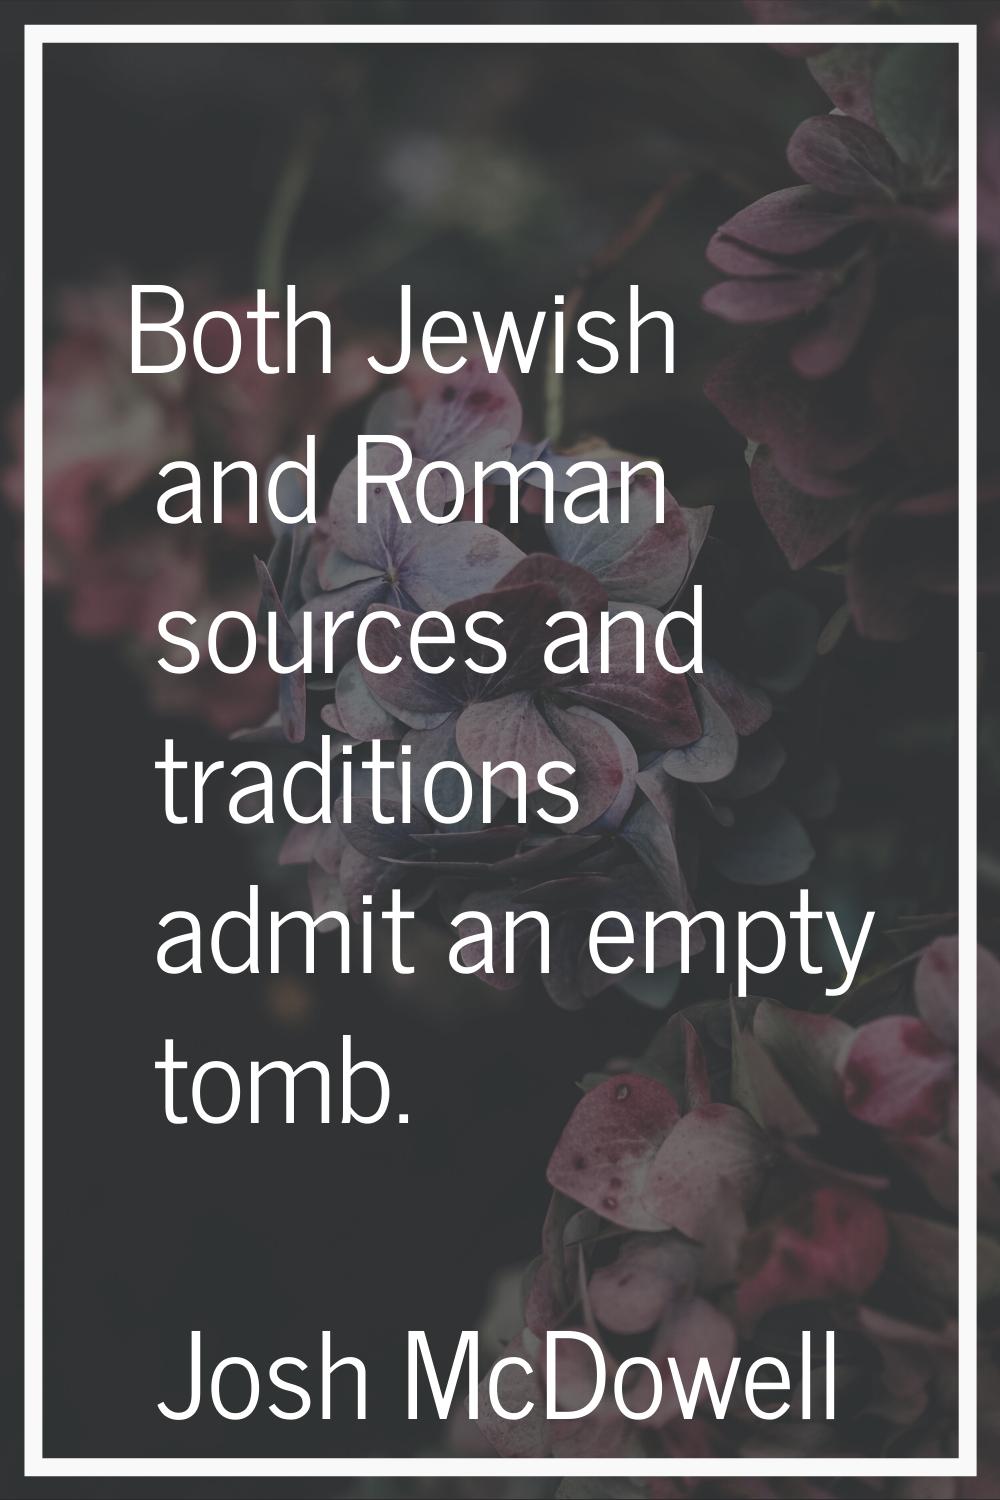 Both Jewish and Roman sources and traditions admit an empty tomb.